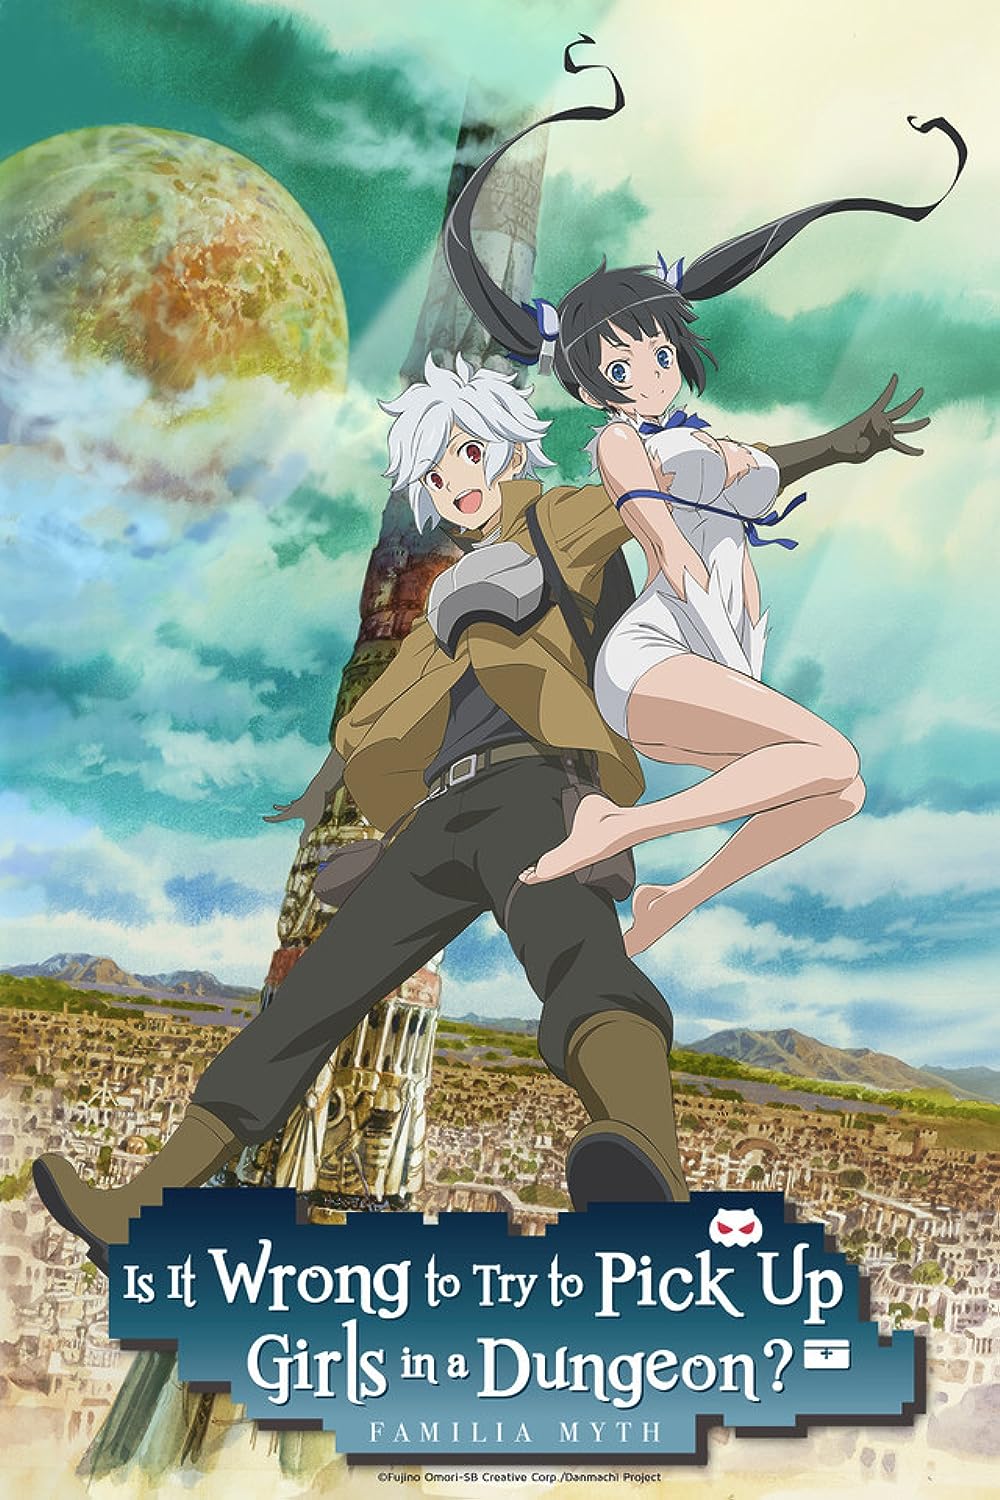 DanMachi: Is It Wrong to Try to Pick Up Girls in a Dungeon?